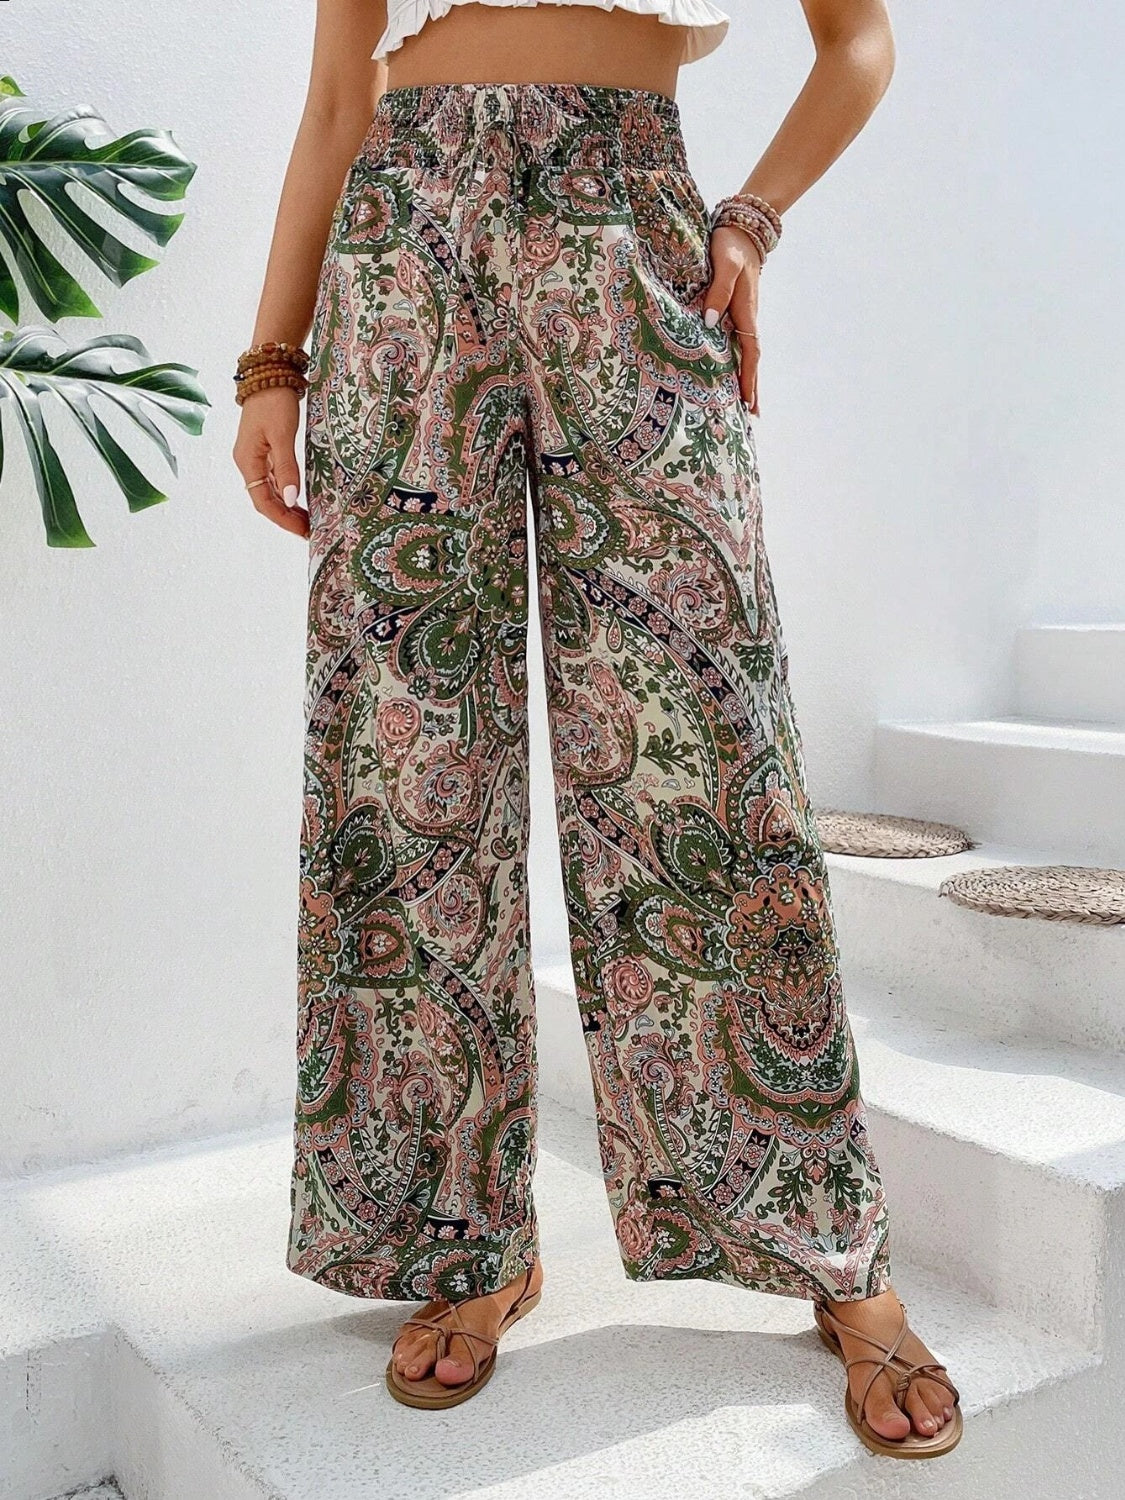 Elevate your style with our Printed Wide Leg Pants. Comfort meets boho-chic in these versatile, eye-catching statement pieces. Shop now!